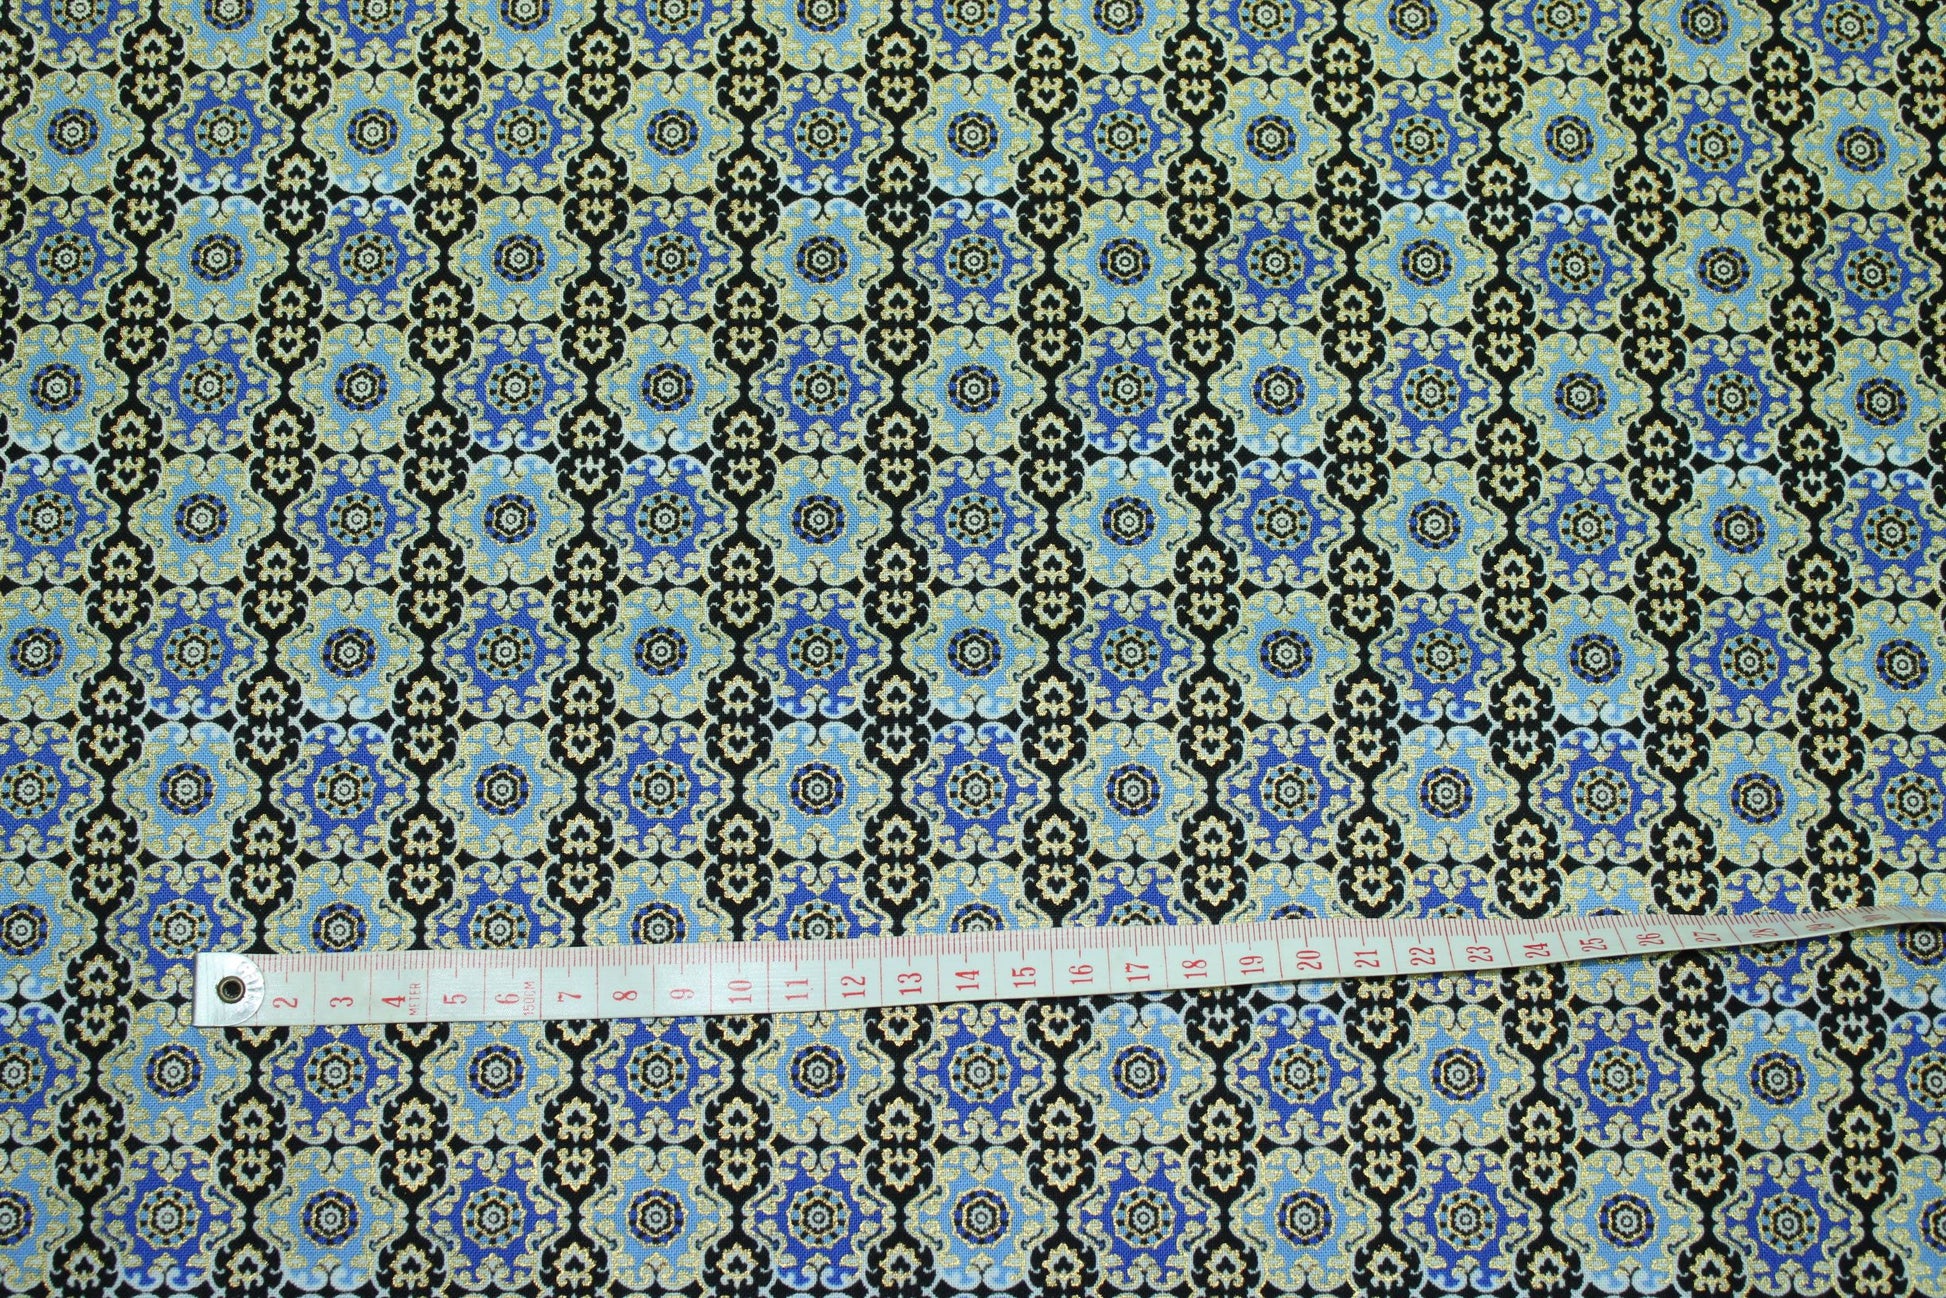 goldedged intricate moroccan patterned cotton print in blues and black